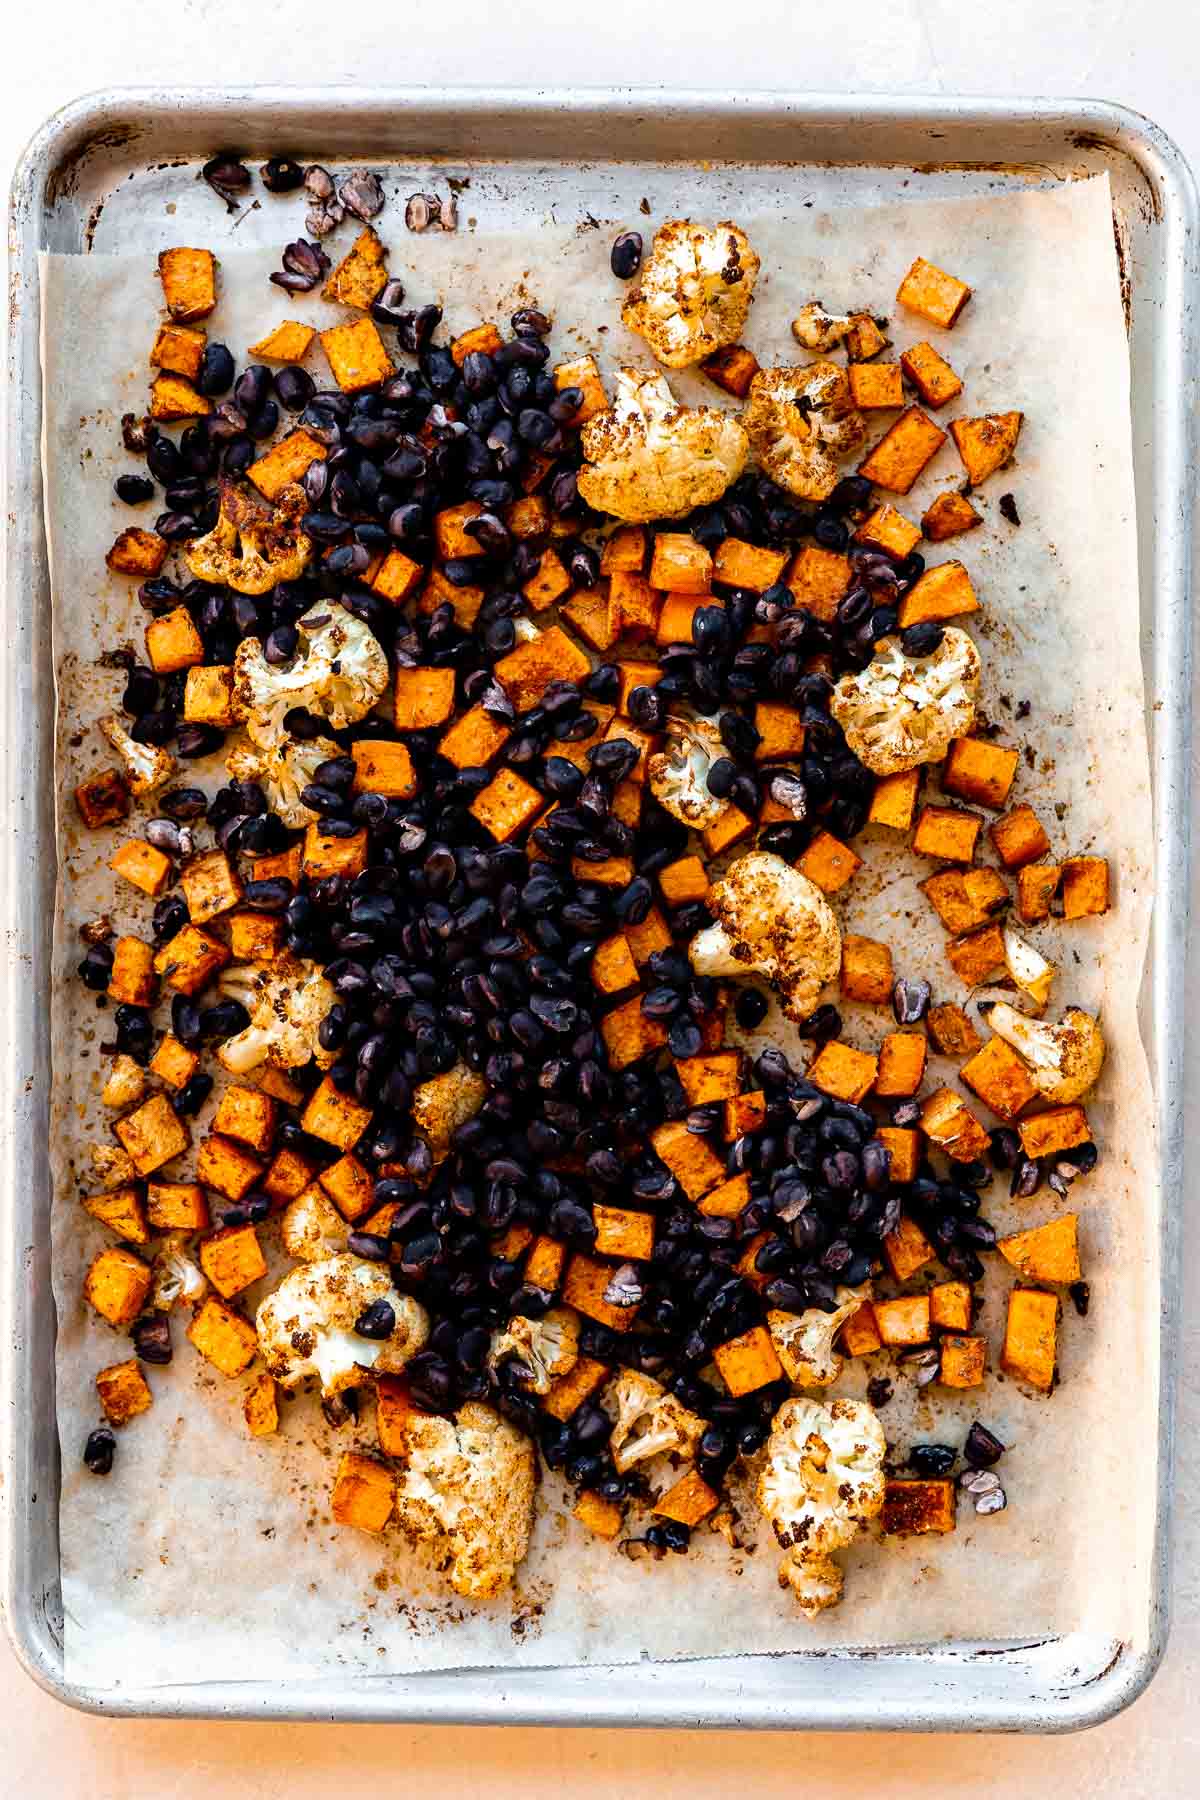 How to make roasted veggie tacos, step 2: Roast the cauliflower and sweet potatoes. Seasoned and roasted cauliflower florets and diced sweet potato are arranged atop a parchment lined baking sheet. Drained black beans are added to the sheet pan and the baking sheet rests atop a light peach colored textured surface.